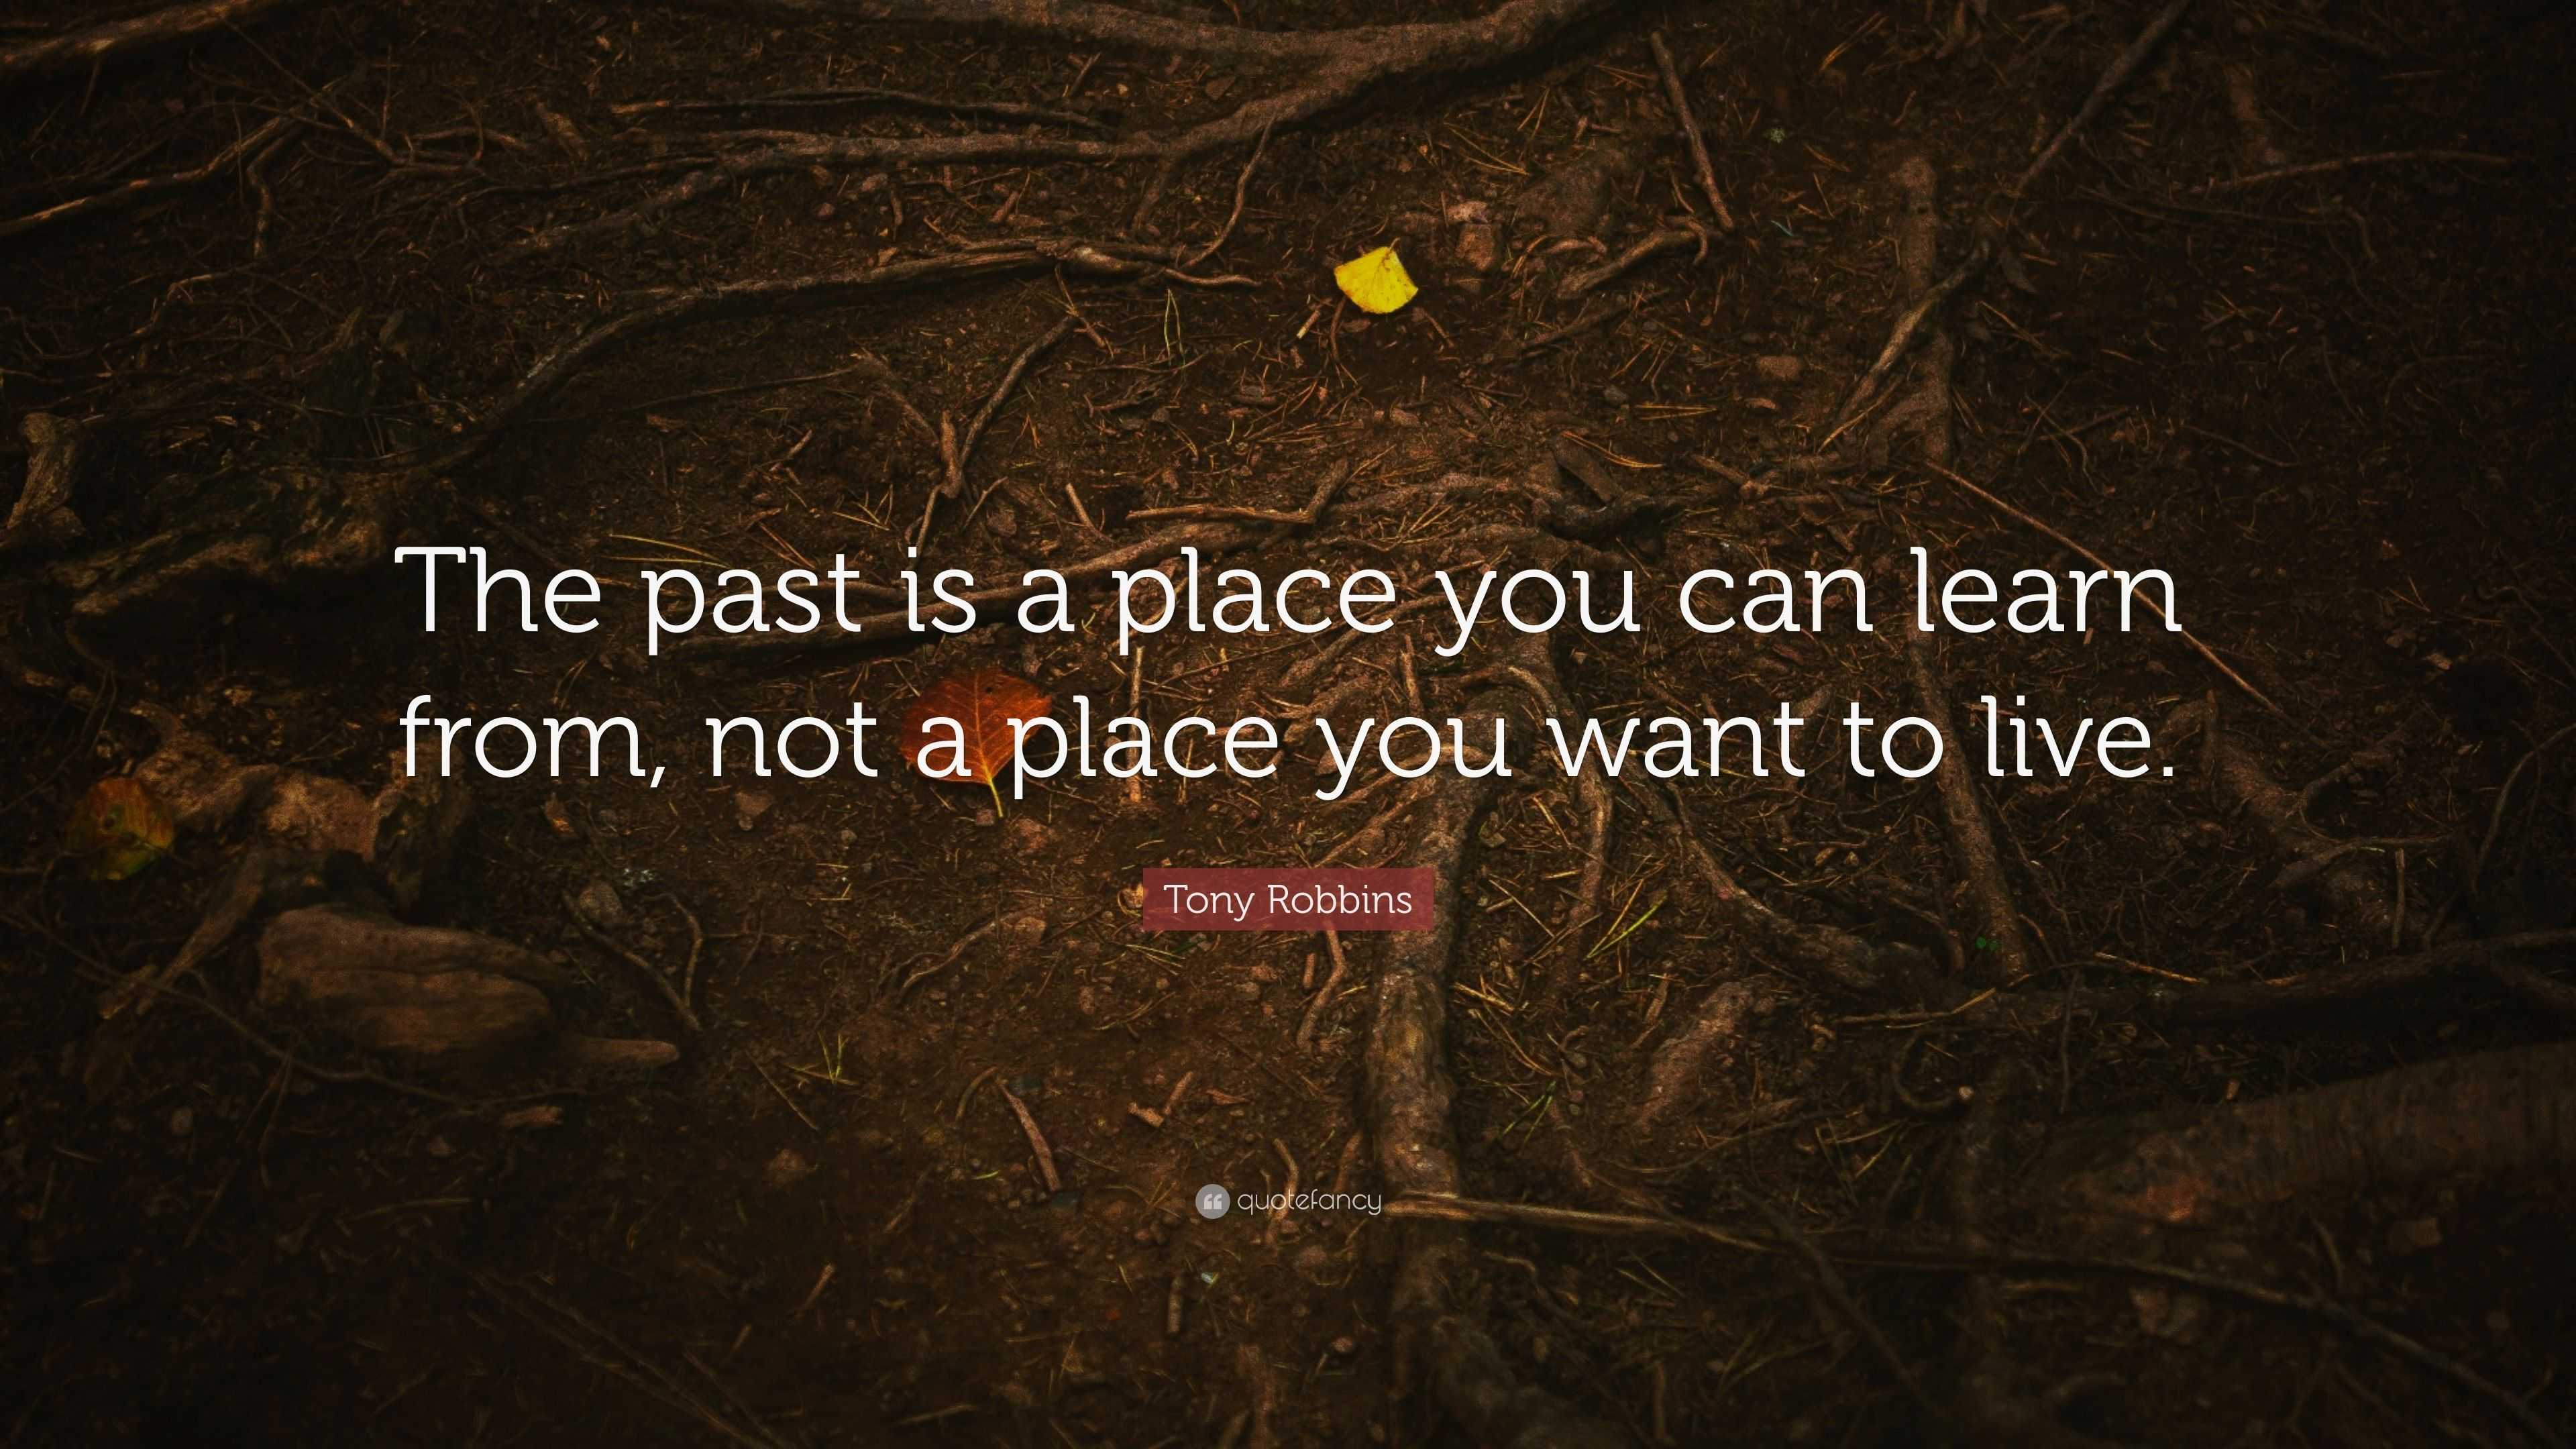 Tony Robbins Quote: “The past is a place you can learn from, not a ...